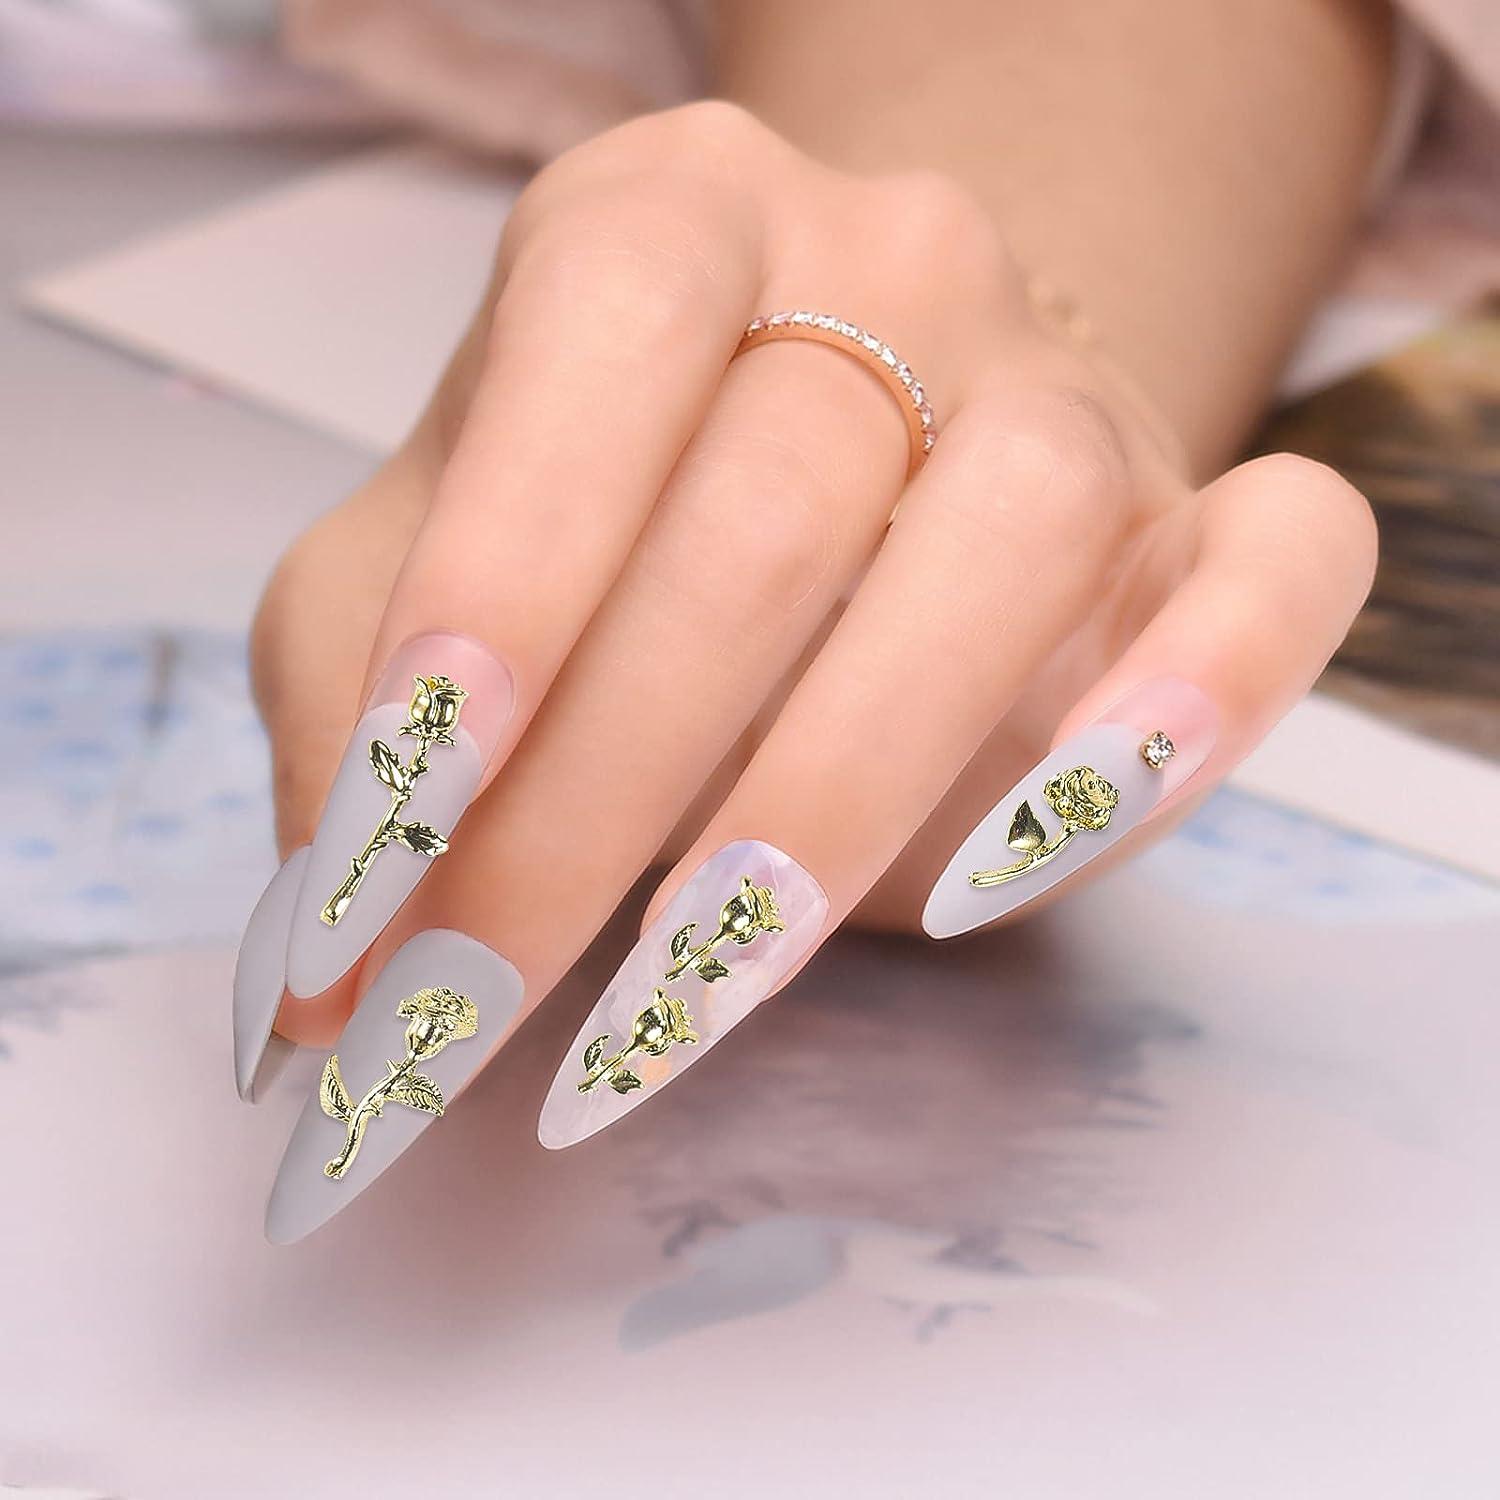 3D Rose Gold Shiny Star Design Nail Art Stickers Self-adhesive Manicure  Accessories Tools - Etsy